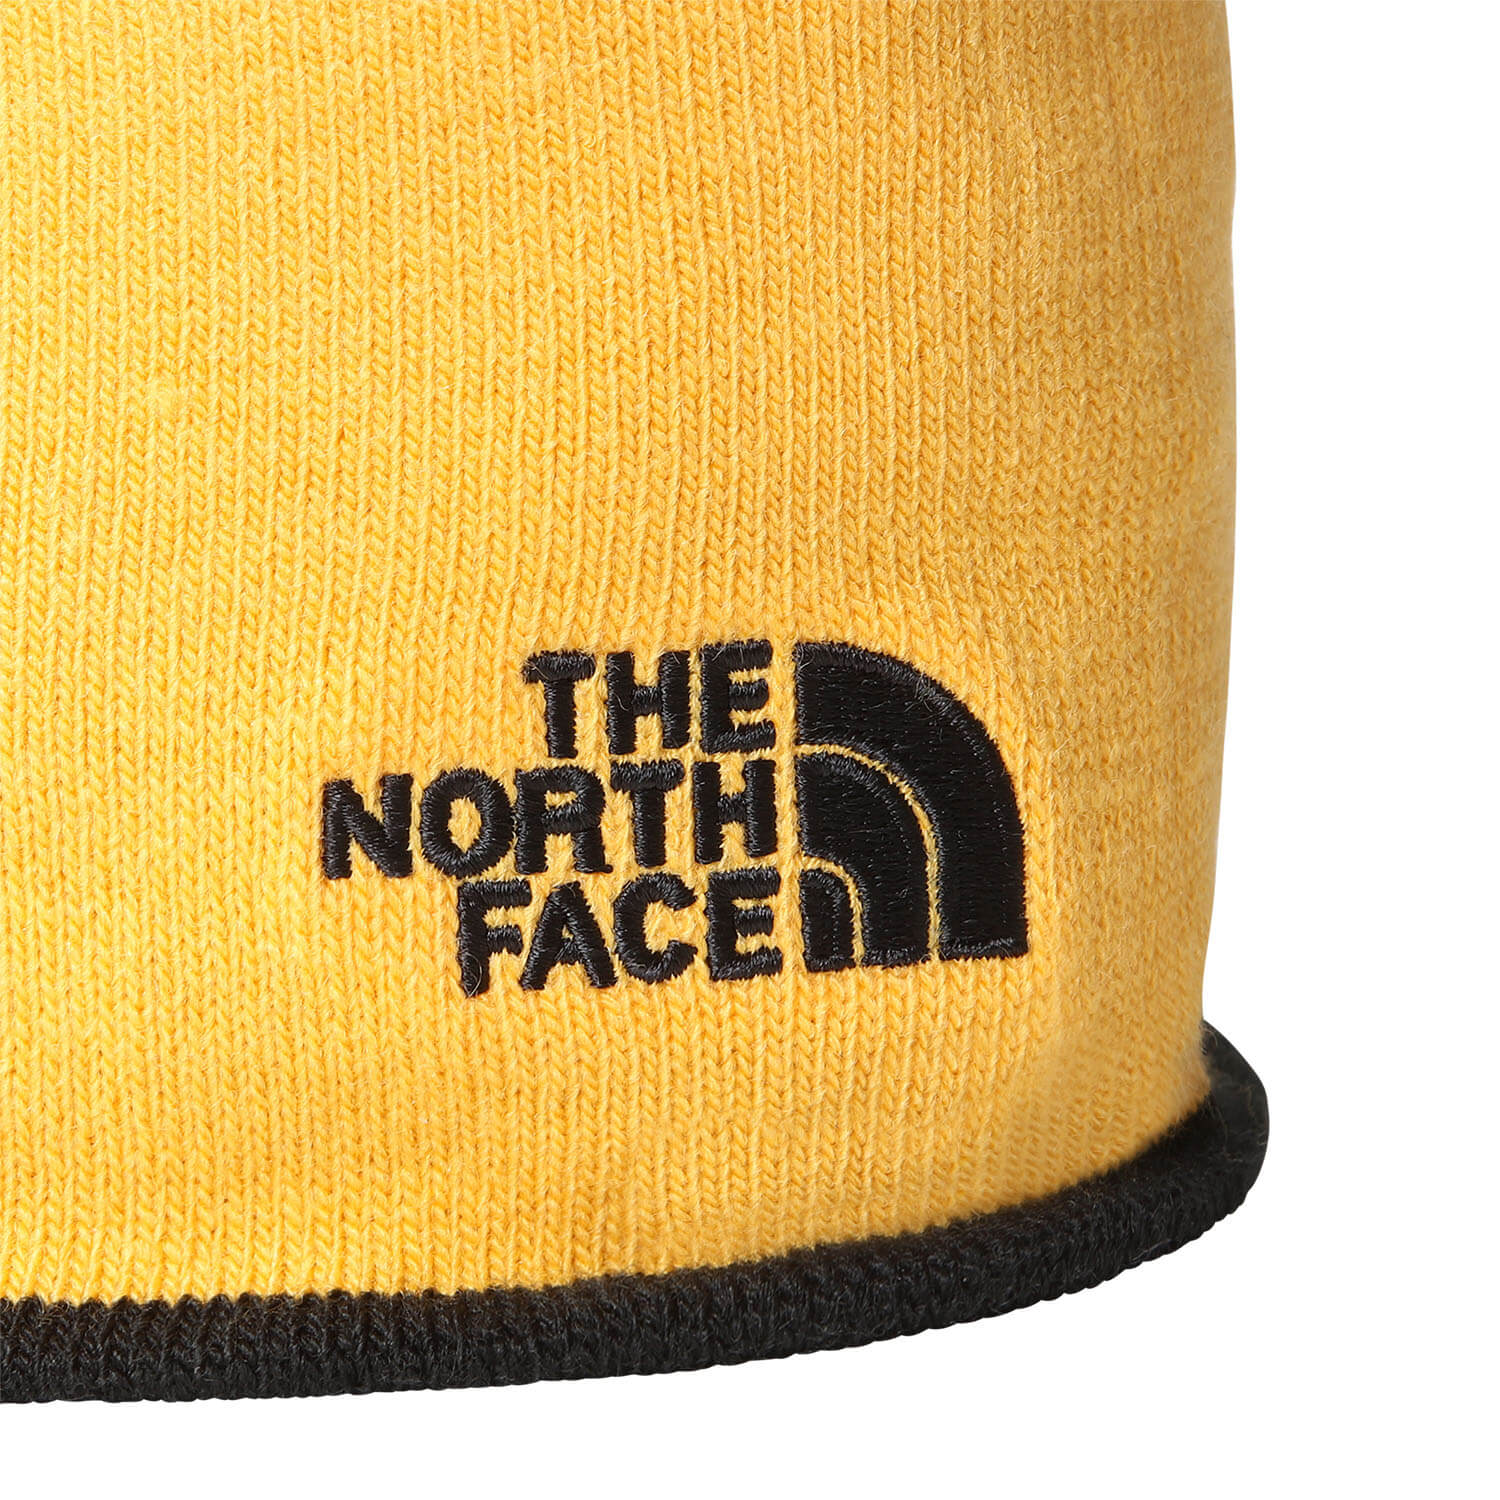 The North Face Reversible TNF Banner Beanie Hat